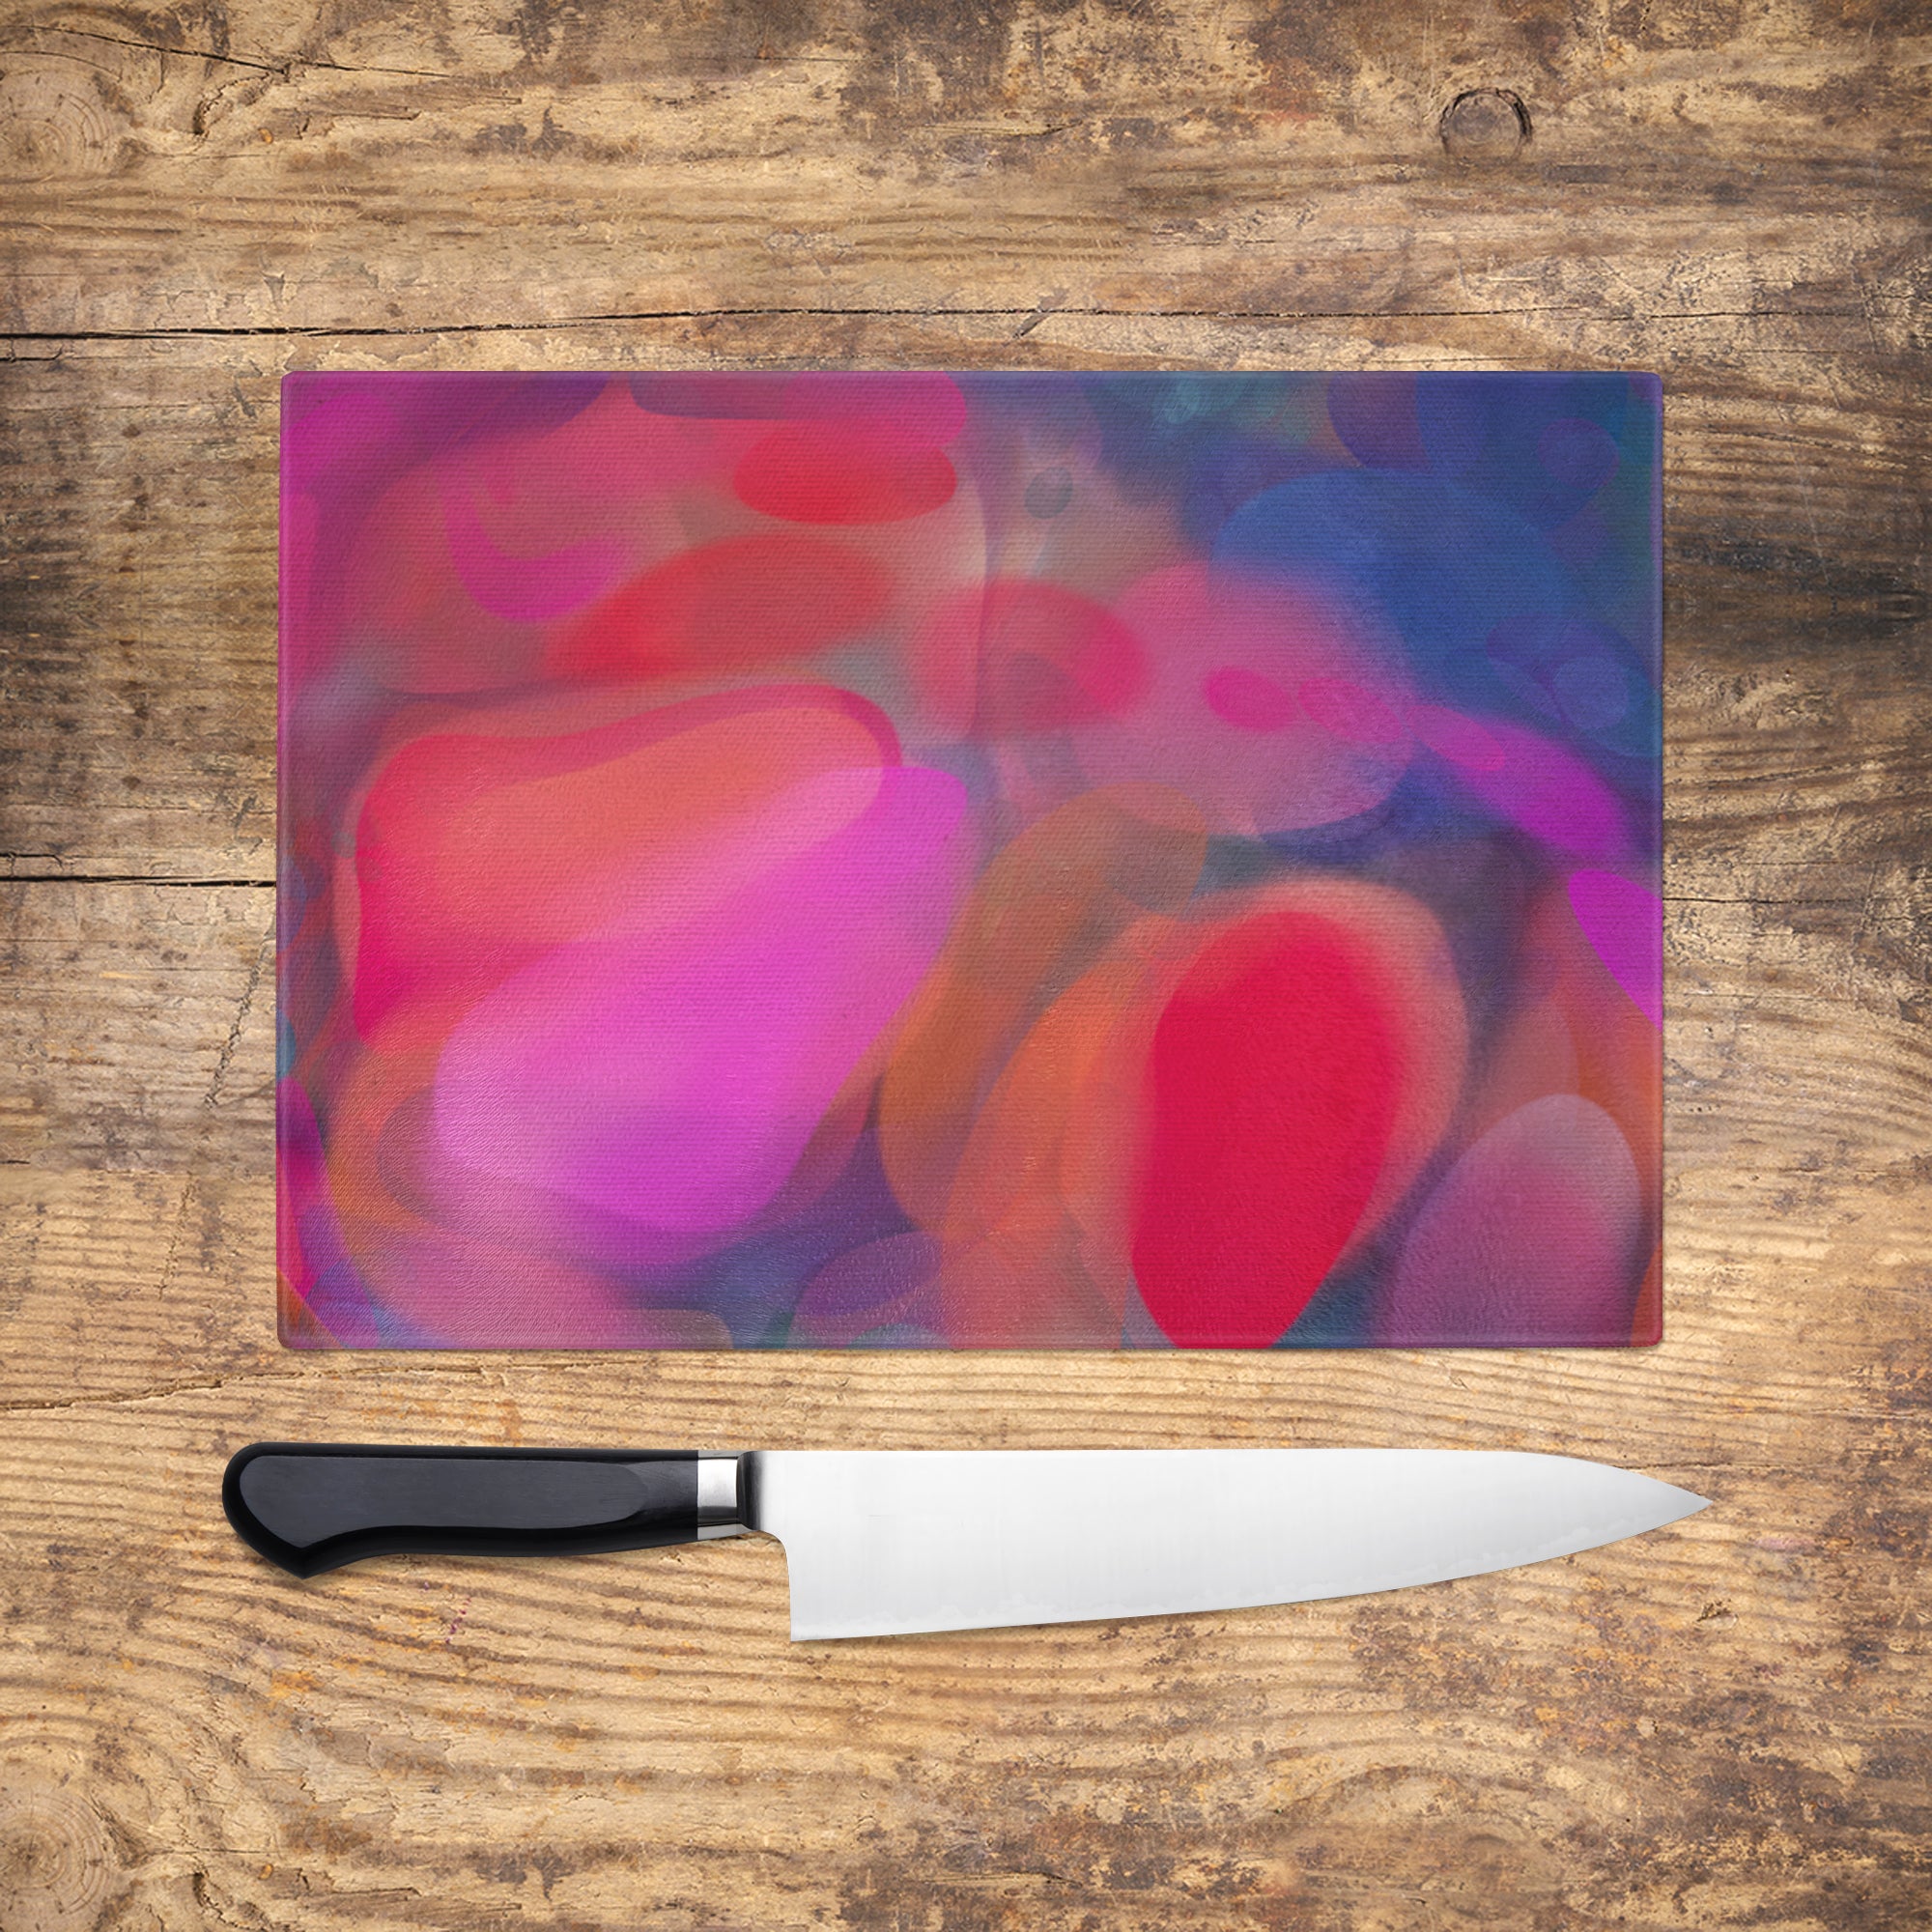 Gorgeous glass chopping board with vibrant abstract design by Louise Mead, perfect for adding a splash of colour to any kitchen.